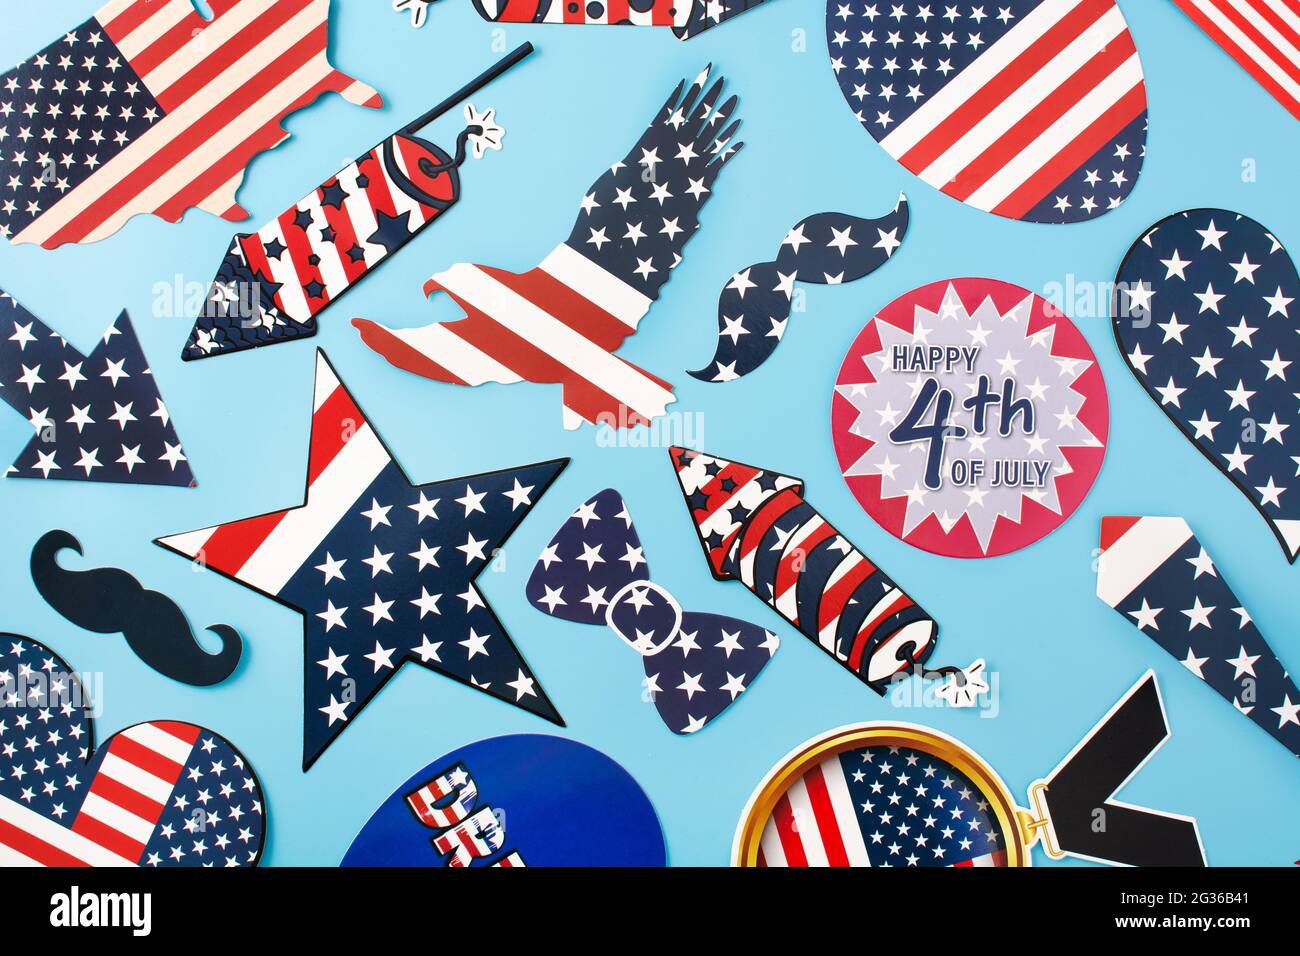 Happy 4th July ornament on blue background Stock Photo